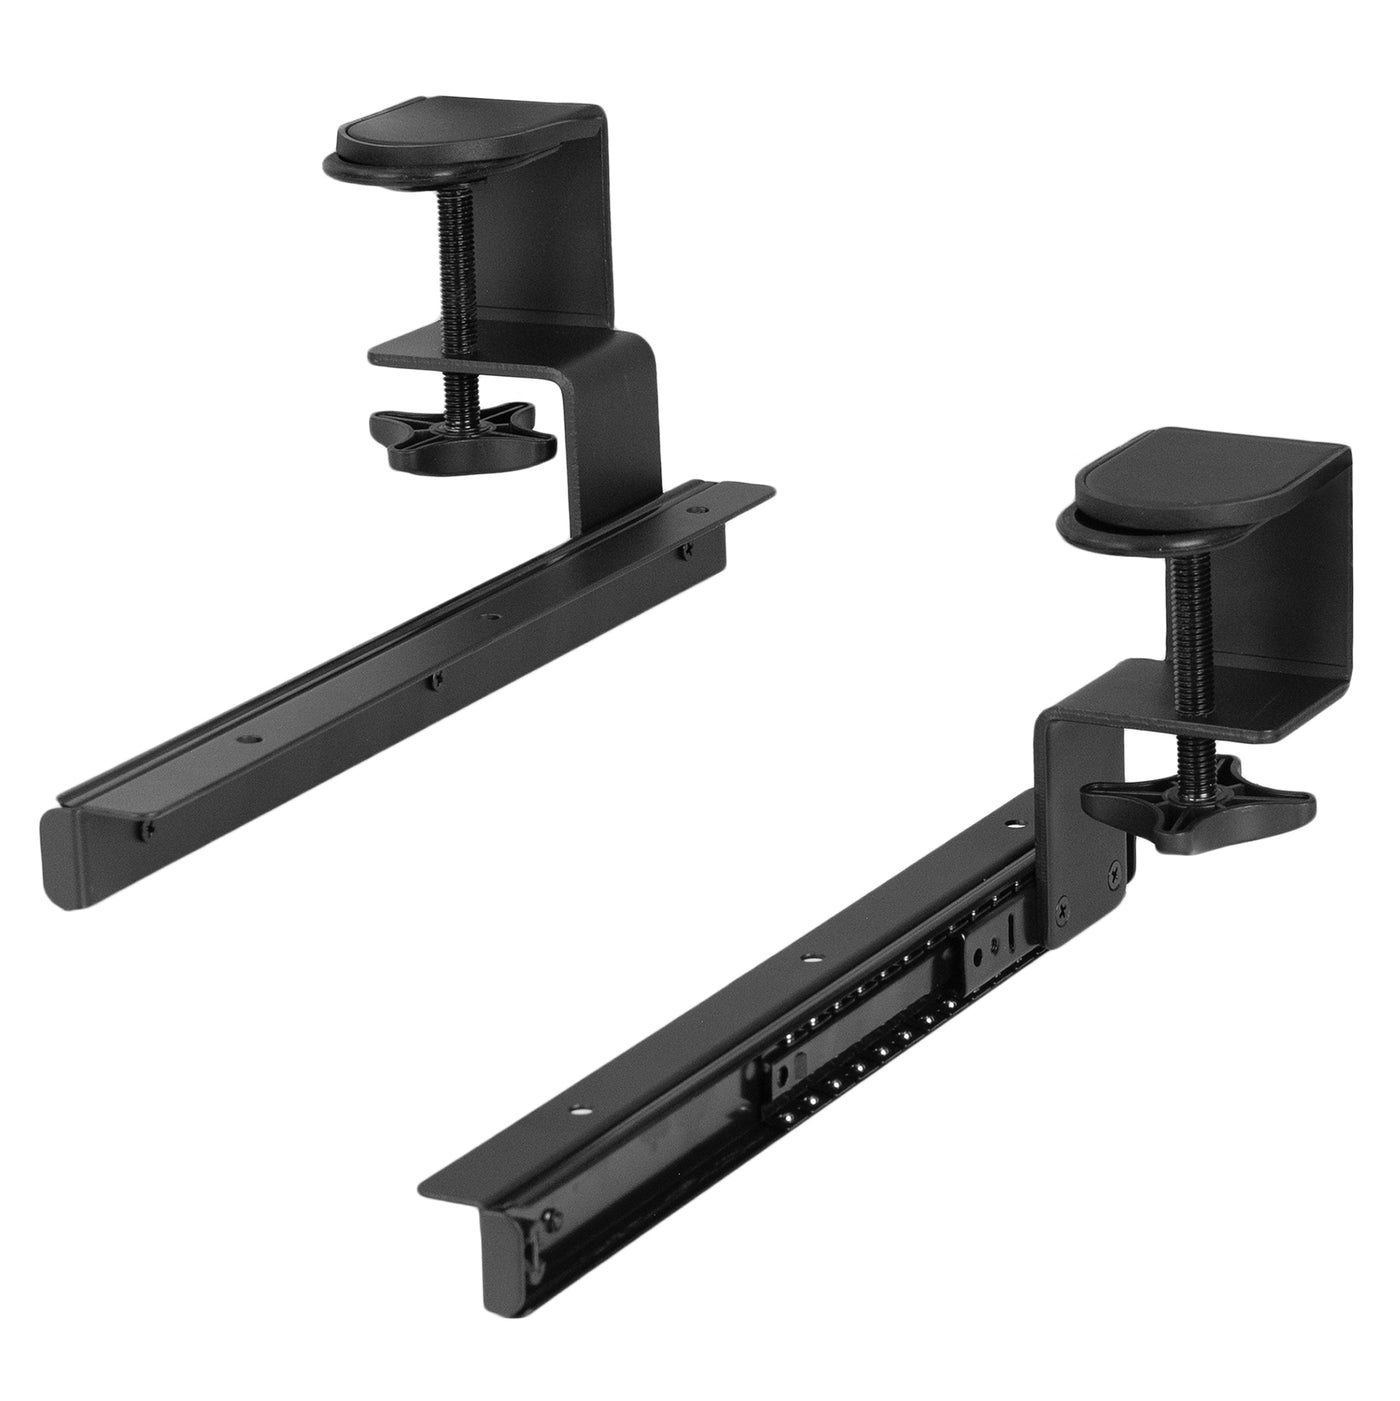 Under-desk sliding pull out keyboard tray clamp and rail set (2 pack).